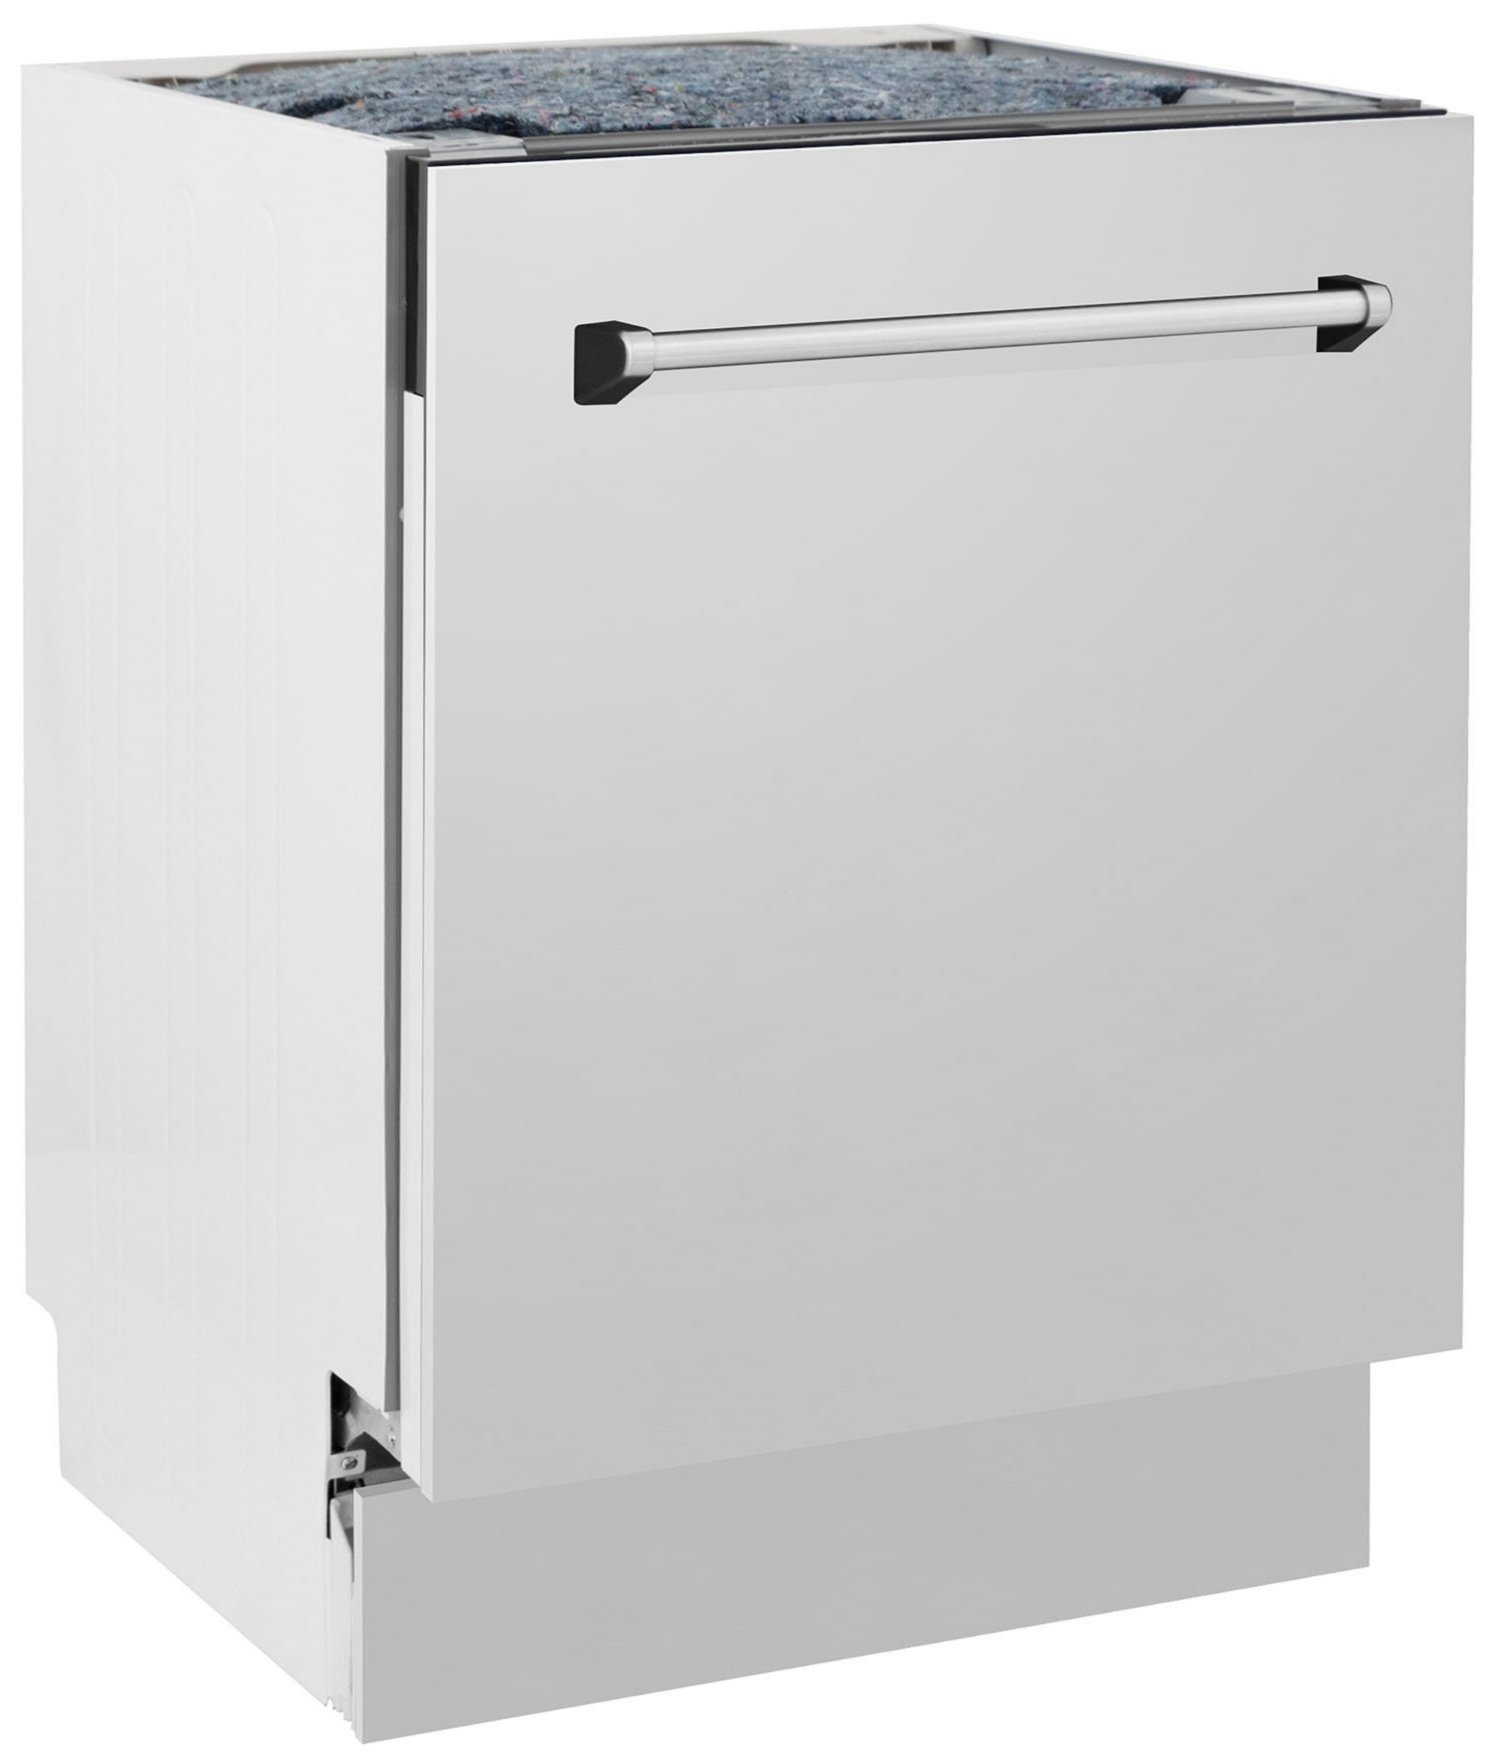 ZLINE 24" Top Control Tall Tub Dishwasher in Custom Panel Ready with Stainless Steel Tub and 3rd Rack (DWV-24) (304 Stainless Steel) 